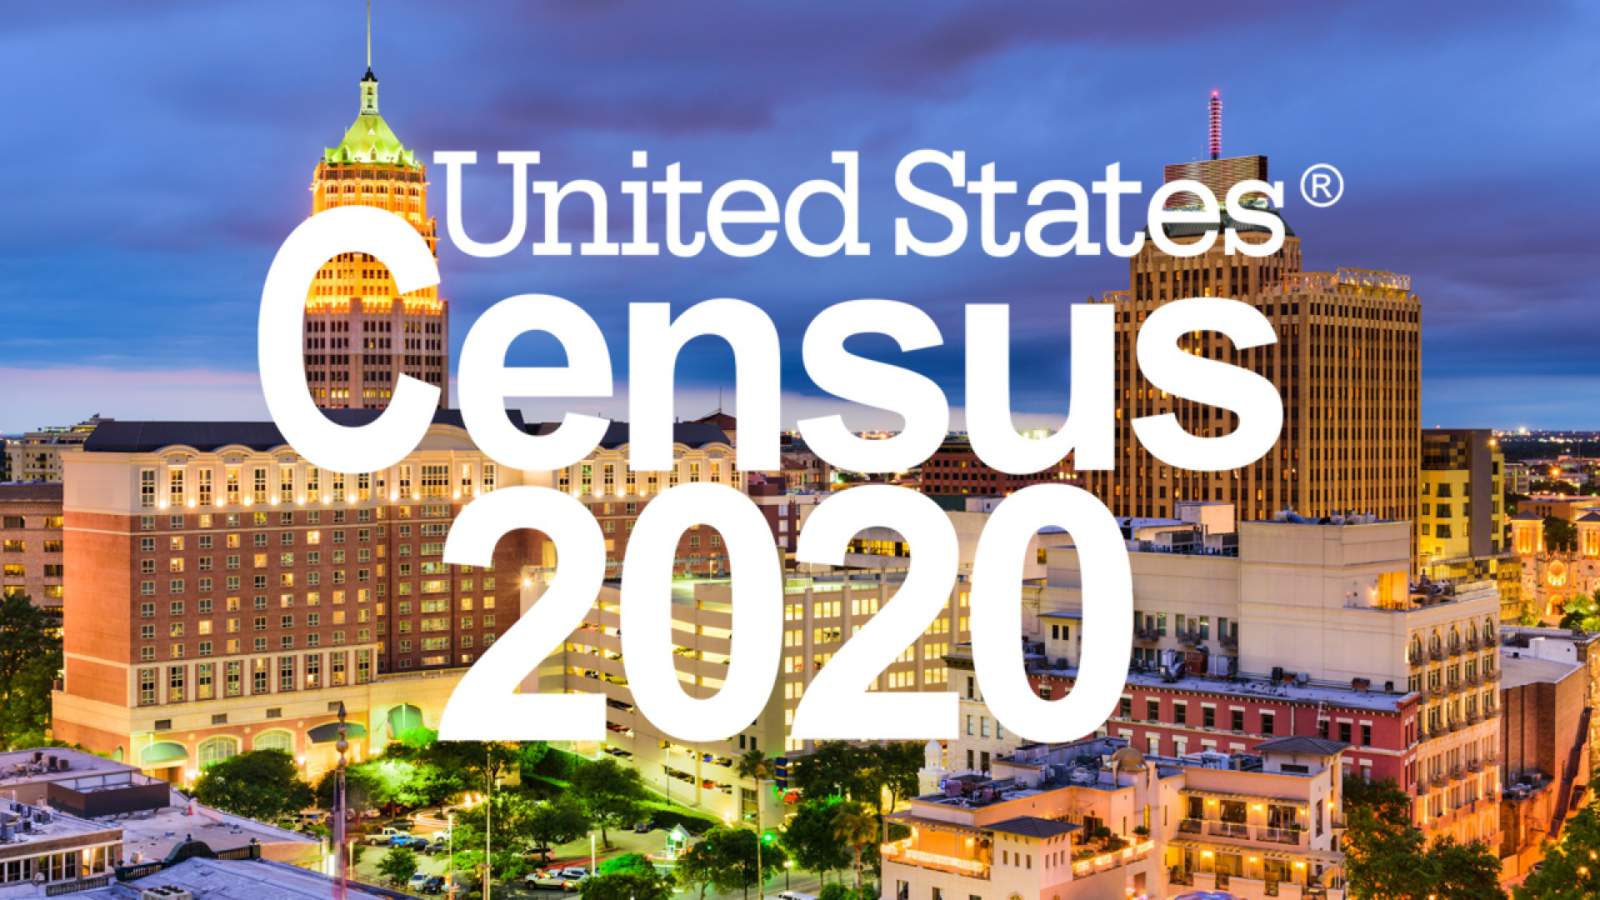 What happens if you don’t fill out the 2020 census?